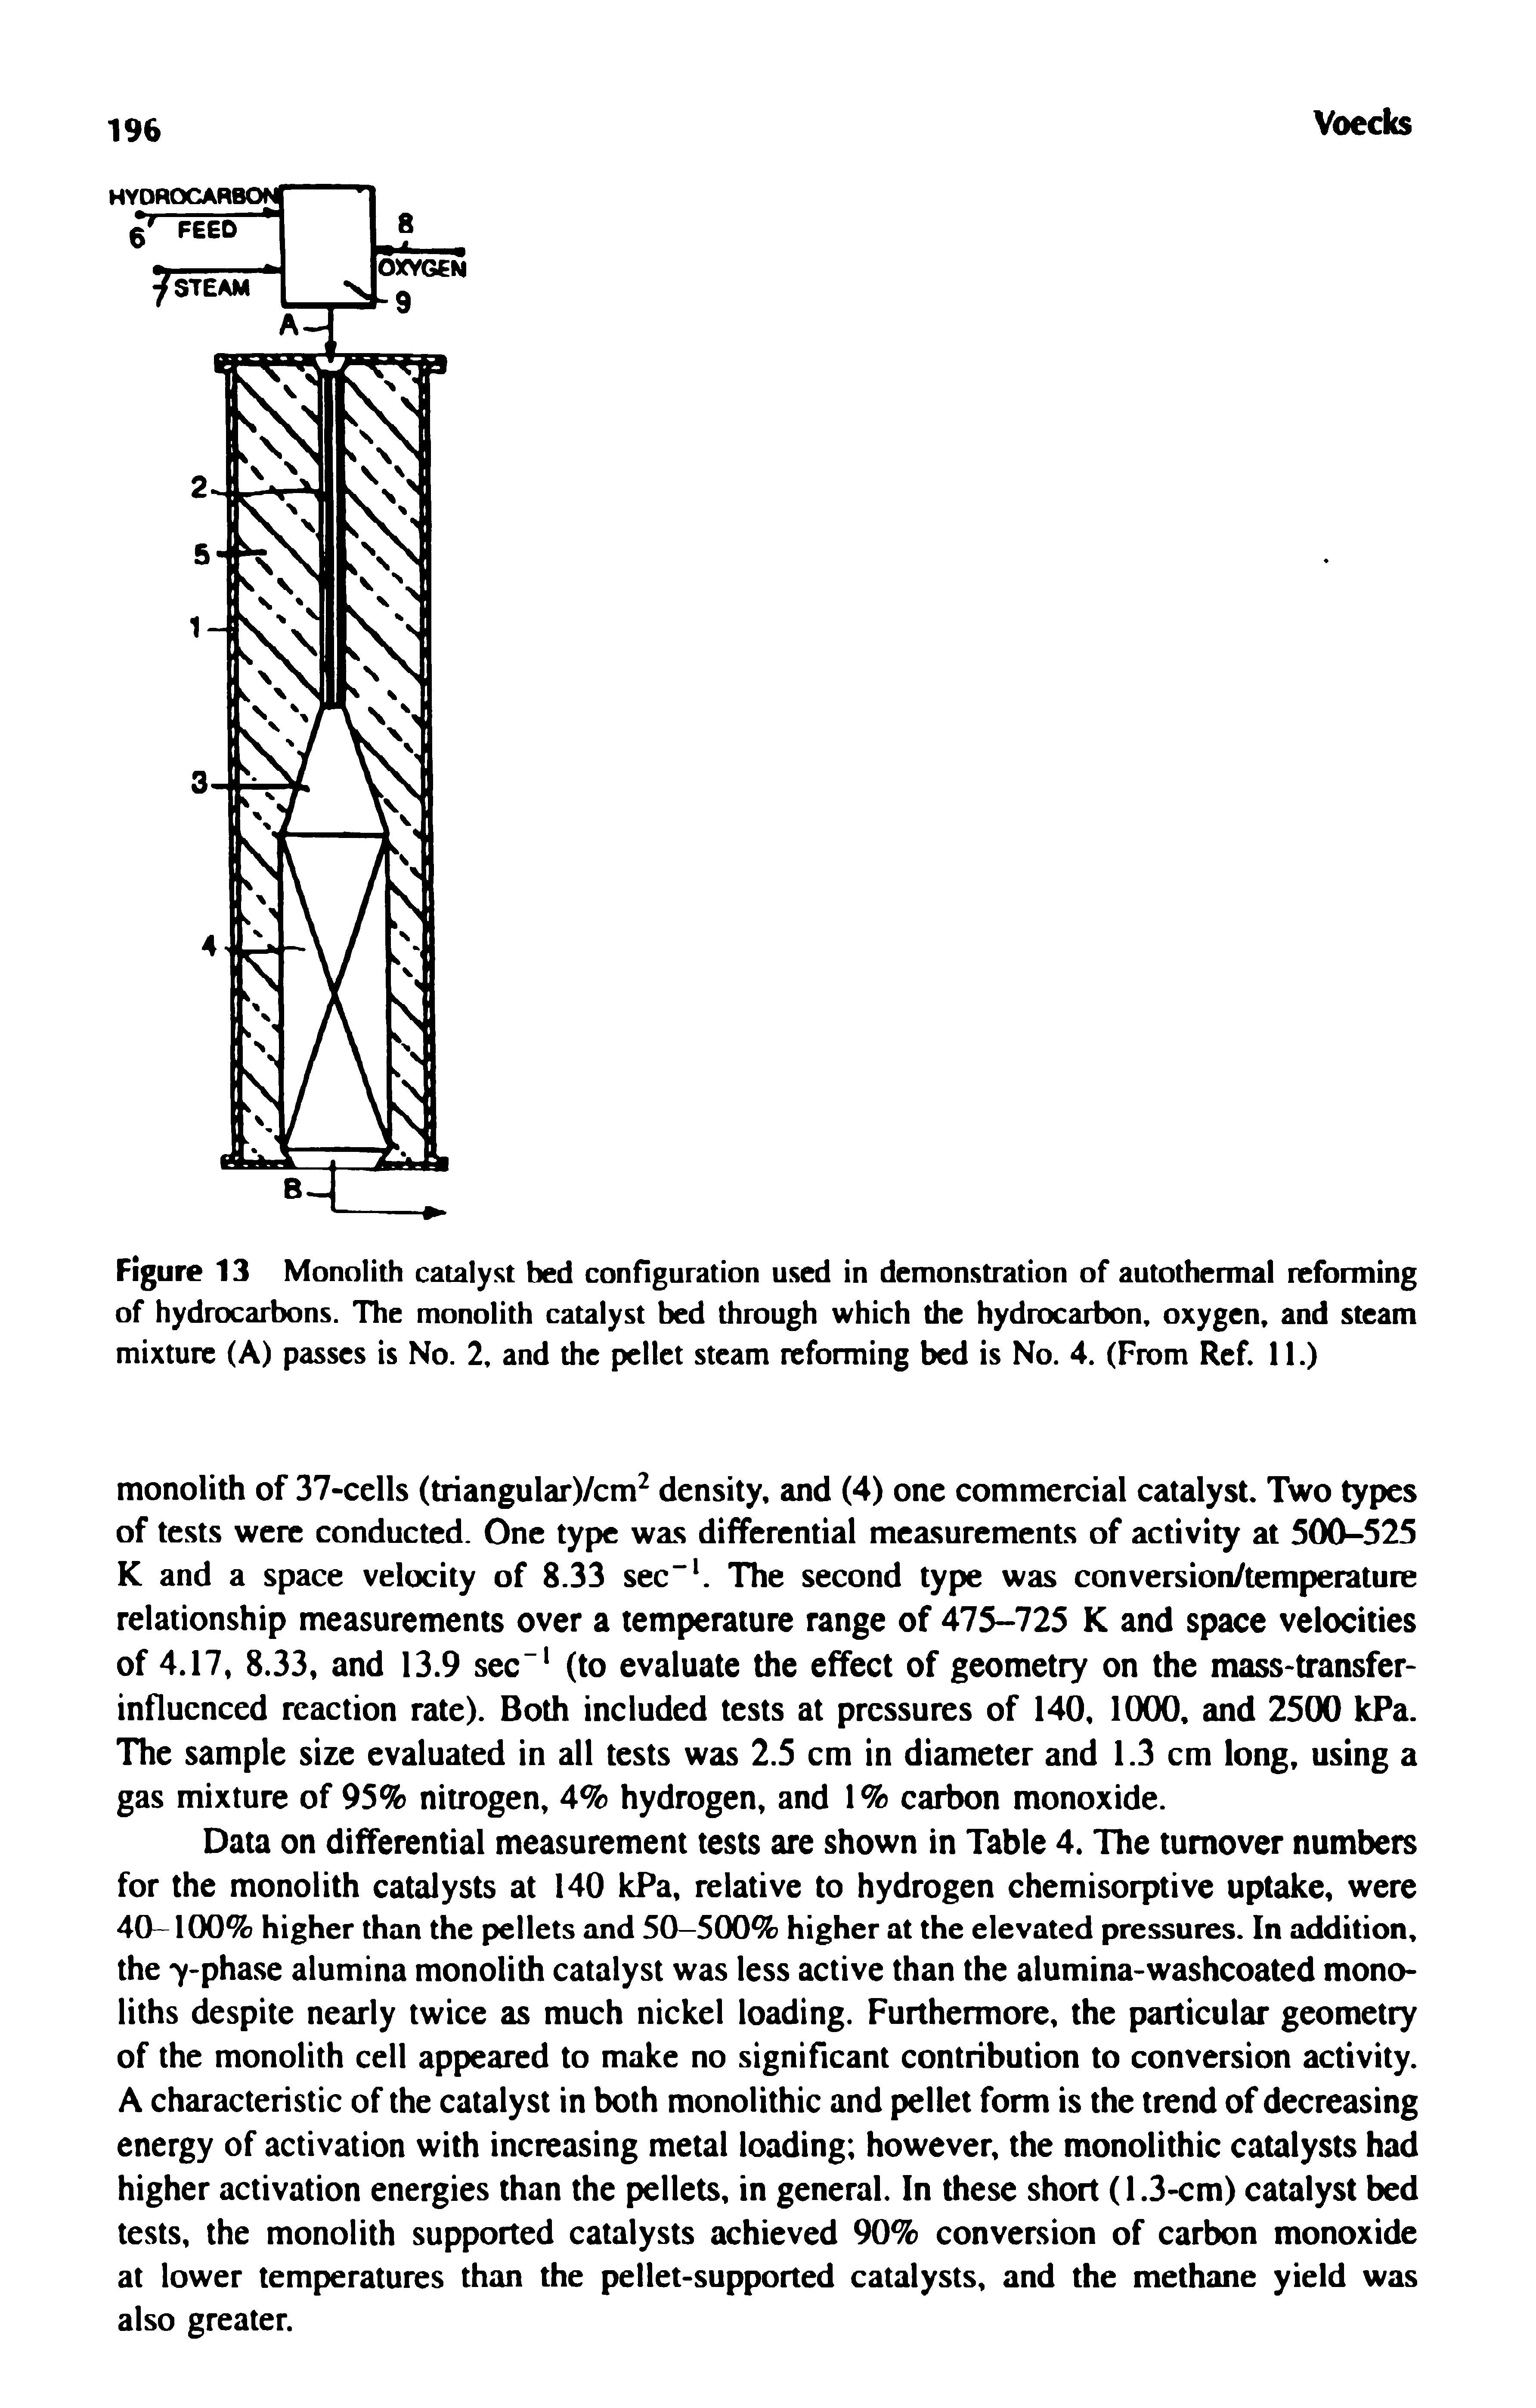 Figure 13 Monolith catalyst bed configuration used in demonstration of autothermal reforming of hydrocarbons. The monolith catalyst bed through which the hydrocarbon, oxygen, and steam mixture (A) passes is No. 2, and the pellet steam reforming bed is No. 4. (From Ref. 11.)...